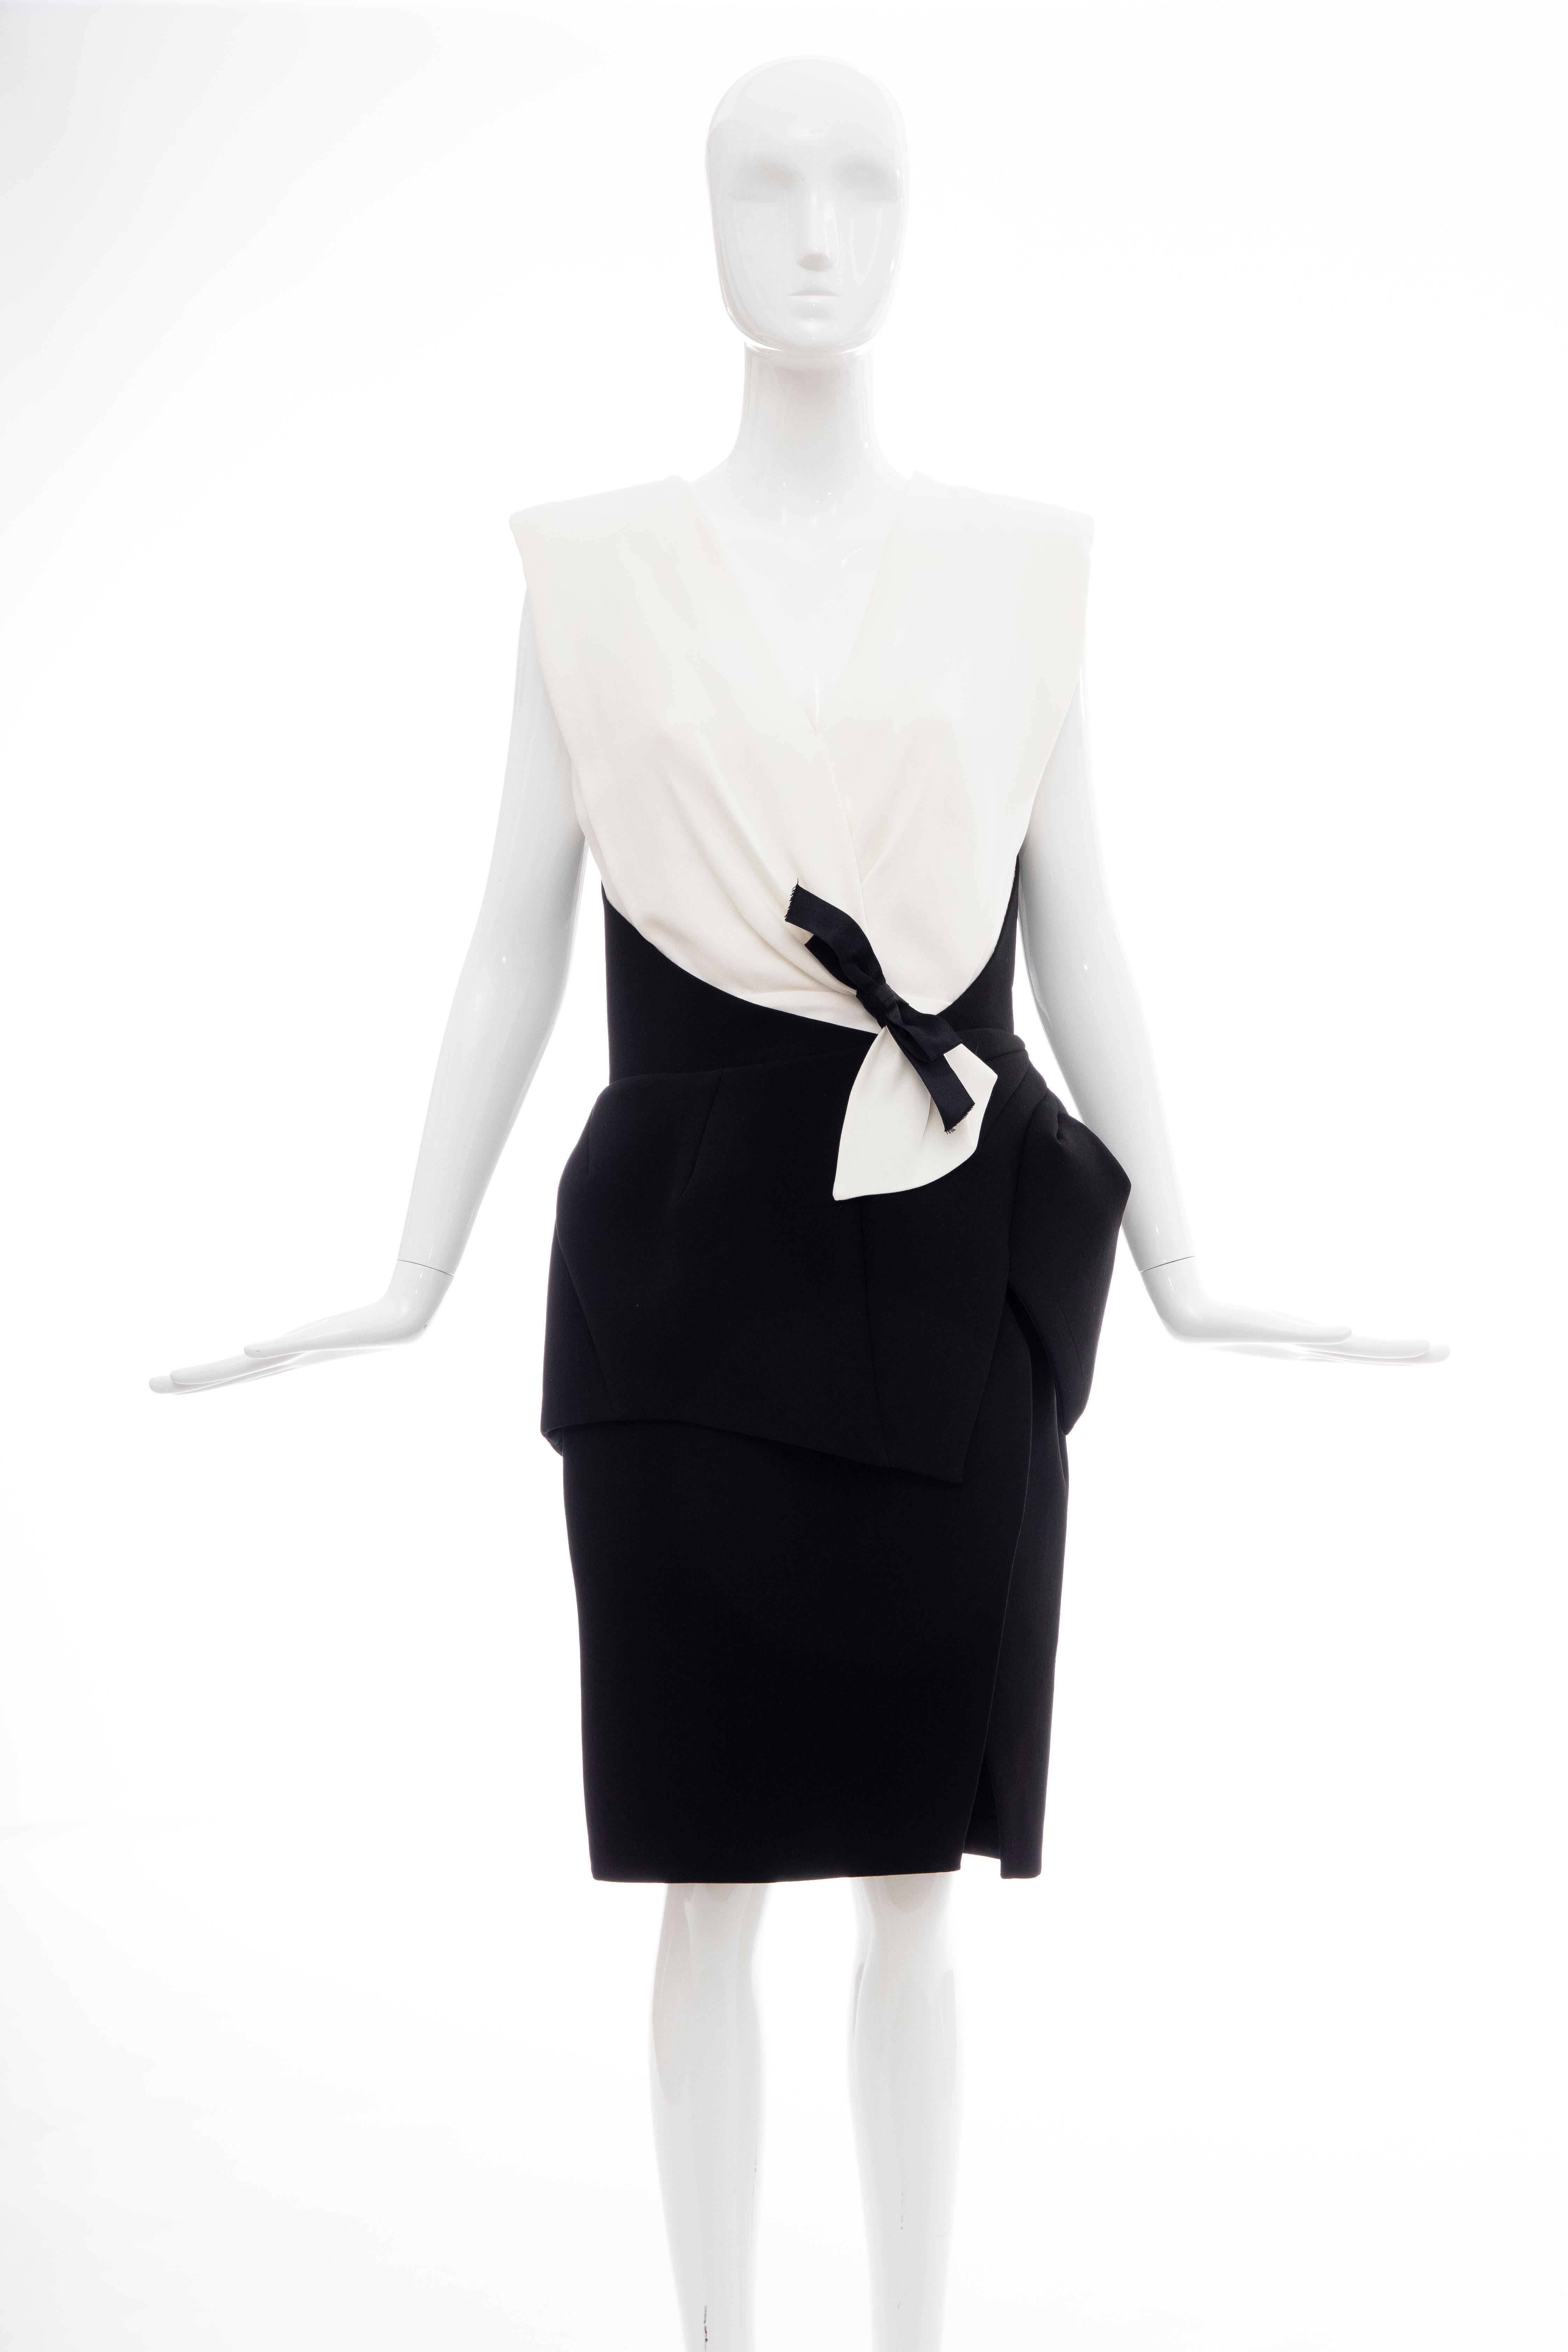 Nicolas Ghesquière for Balenciaga Runway Fall 2008 black and white dress with structured shoulders, bow accent at waist, concealed zip closure at back and built-in bra.

FR. 40, US. 8

Fabric: 71% Acetate, 29% Polyester; Combo 52% Viscose, 48%